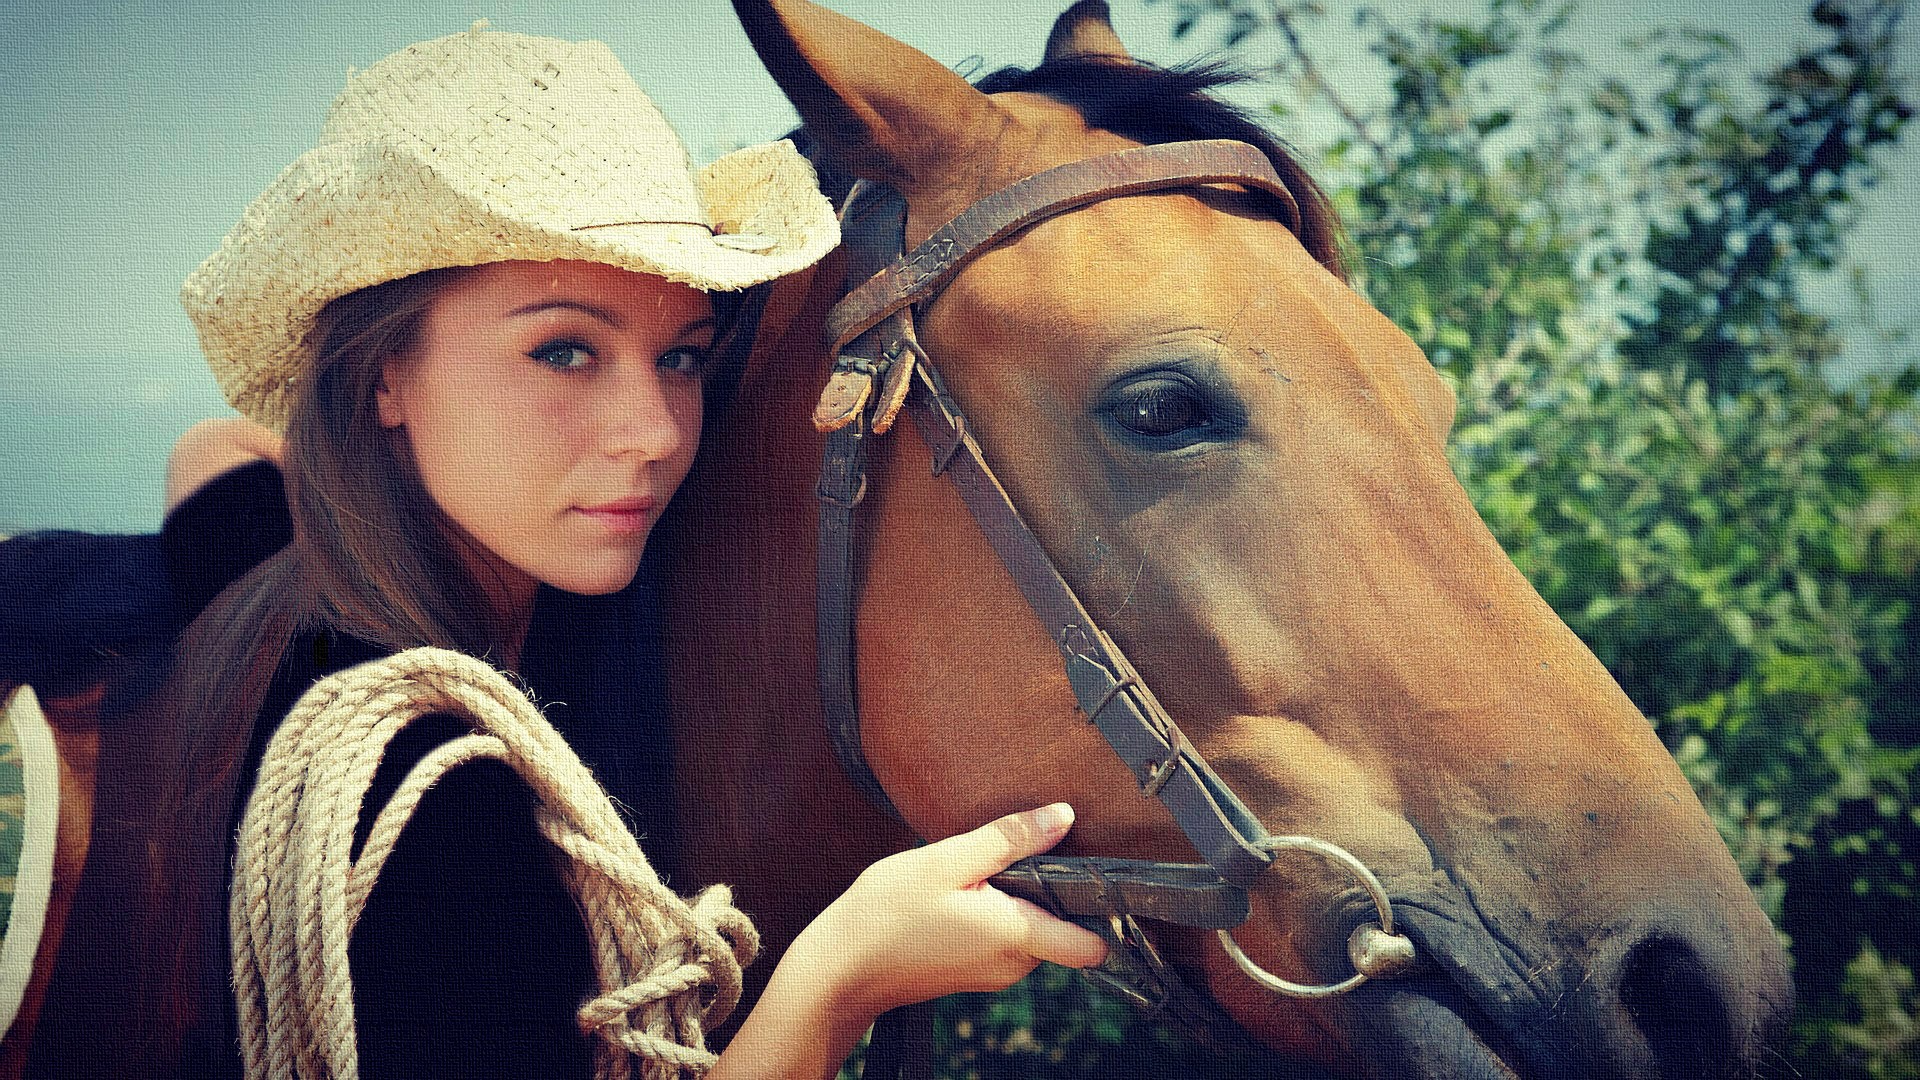 People 1920x1080 photo manipulation Lily Chey women with hats women with horse straw hat millinery cowgirl horse animals mammals looking at viewer hat Ukrainian women women model women outdoors